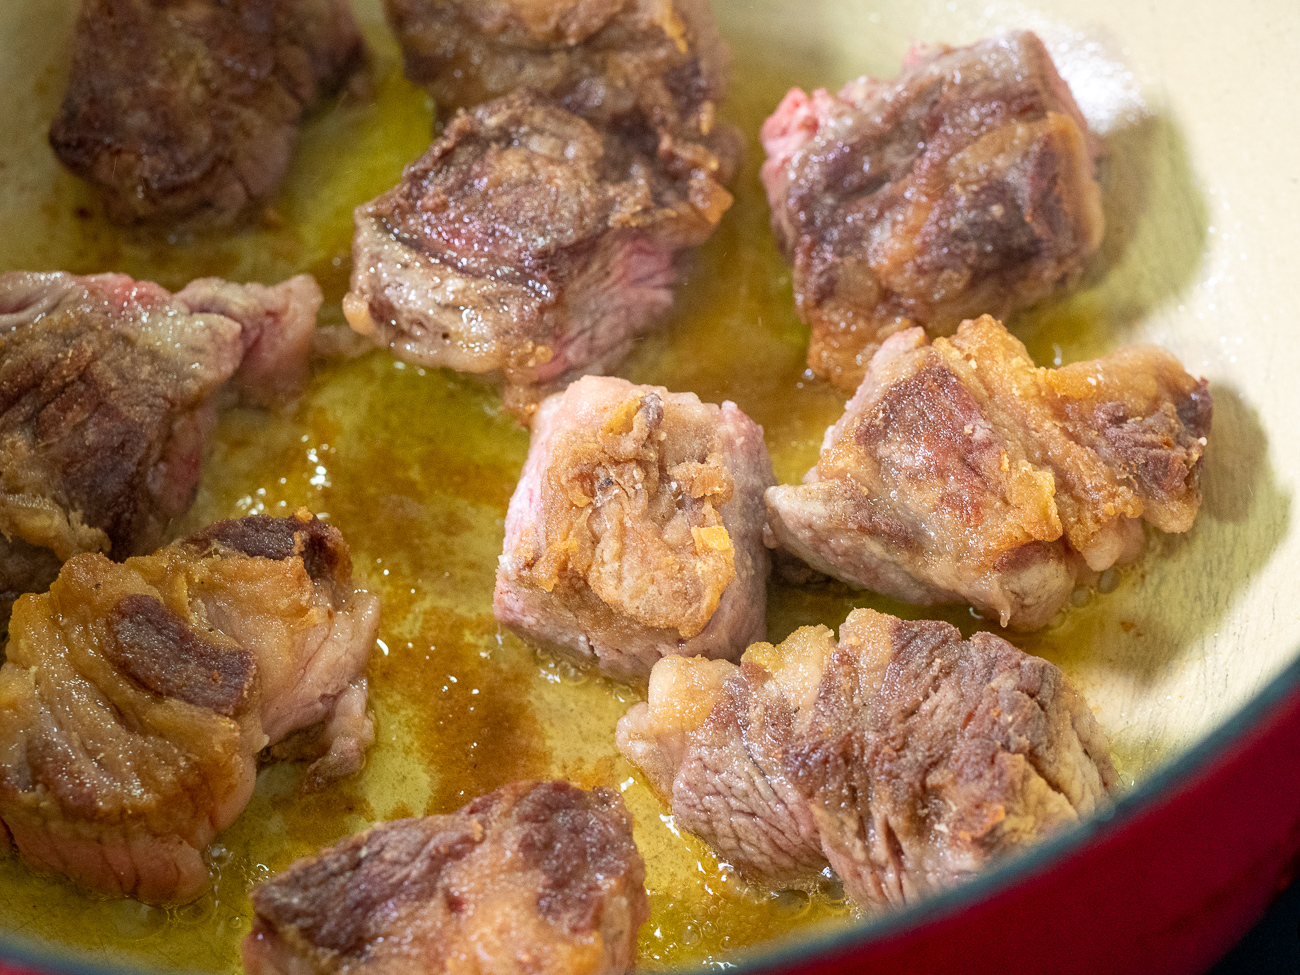 Combine salt, pepper, and flour in a large bowl. Toss beef with flour mixture. Heat 2 teaspoons oil in oven-safe stockpot over medium heat. Add beef and cook until browned on the outside and just beginning to caramelize. Remove beef from pan.